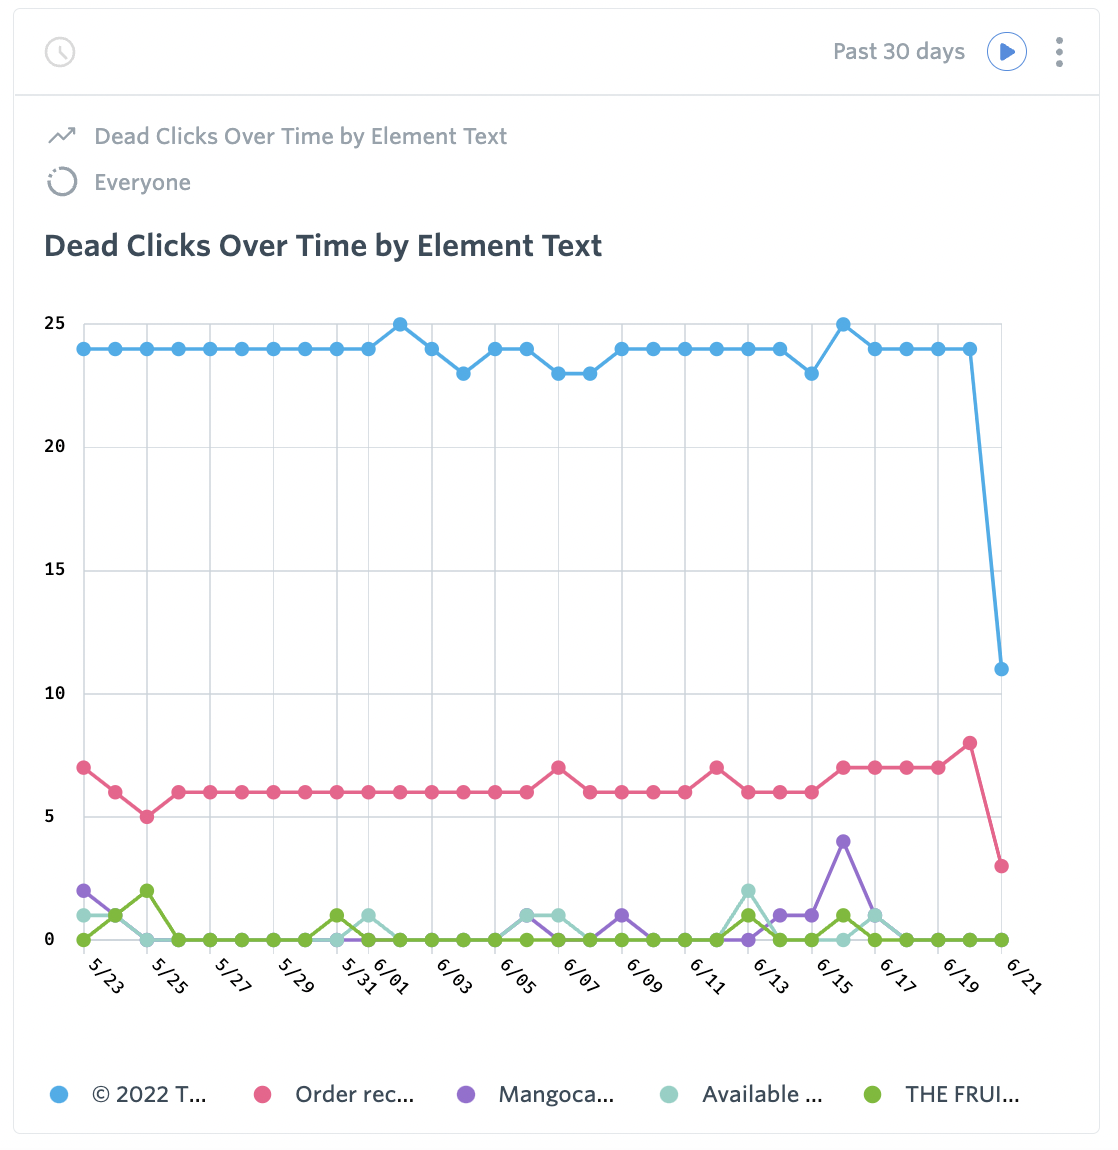 Dead Clicks Over Time by Element Text